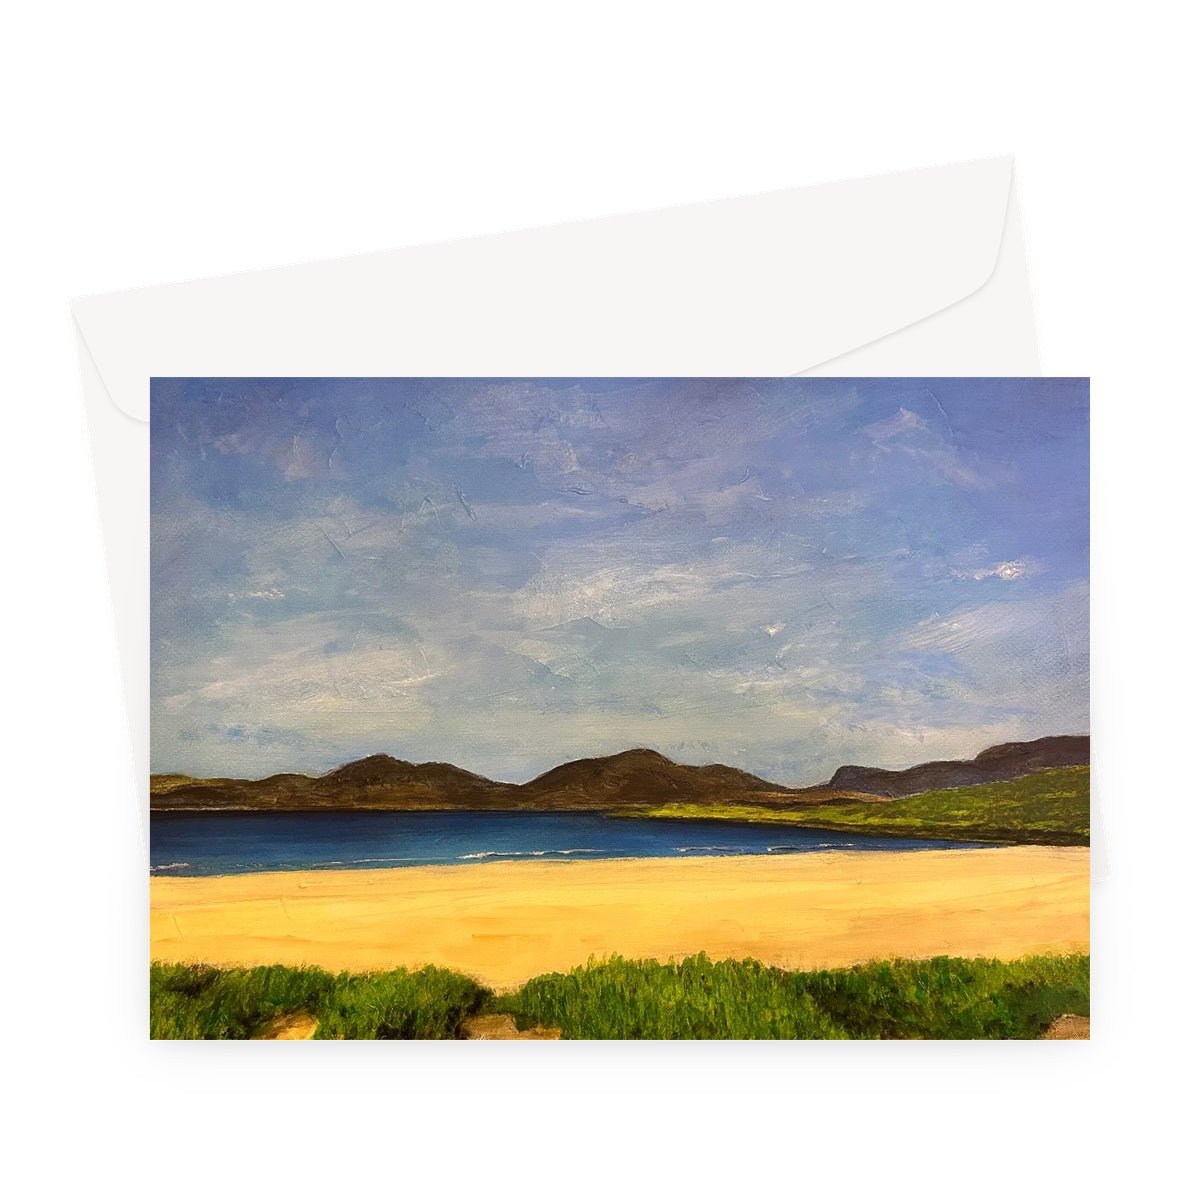 Luskentyre Beach Harris Art Gifts Greeting Card-Greetings Cards-Hebridean Islands Art Gallery-A5 Landscape-1 Card-Paintings, Prints, Homeware, Art Gifts From Scotland By Scottish Artist Kevin Hunter